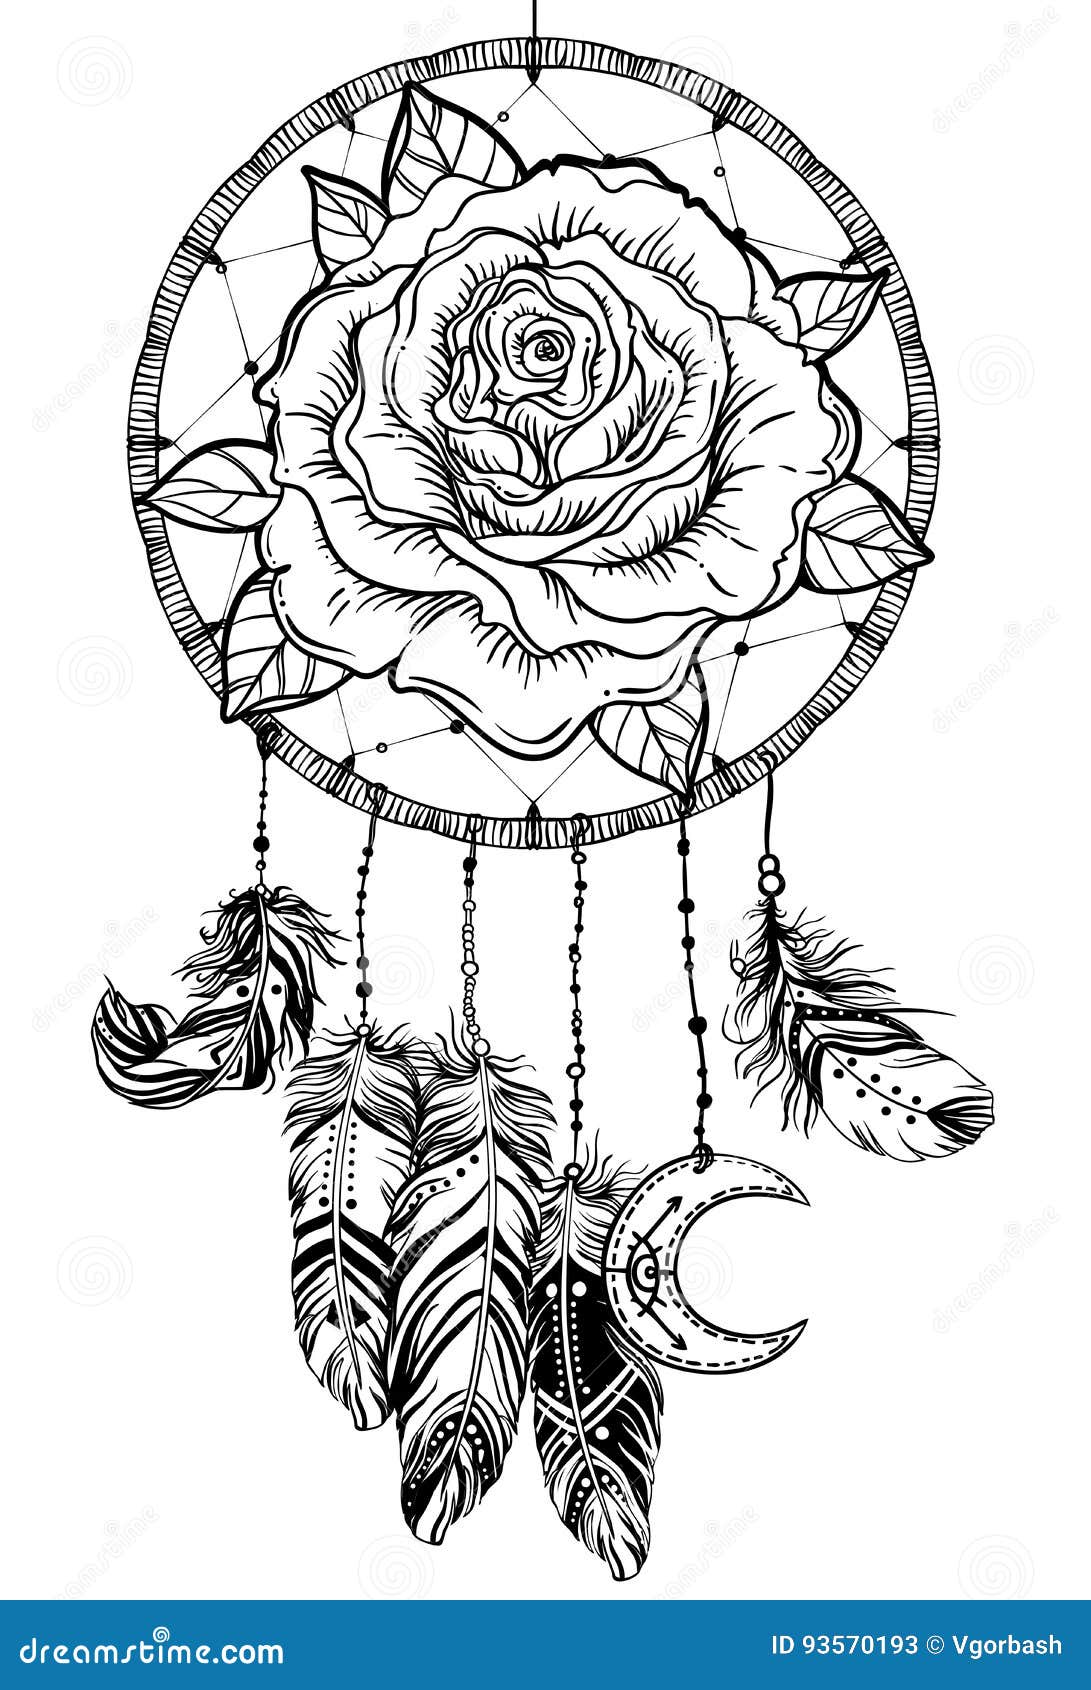 10 Different Dream Catcher Tattoo Designs That You Can Have  Fashionterest